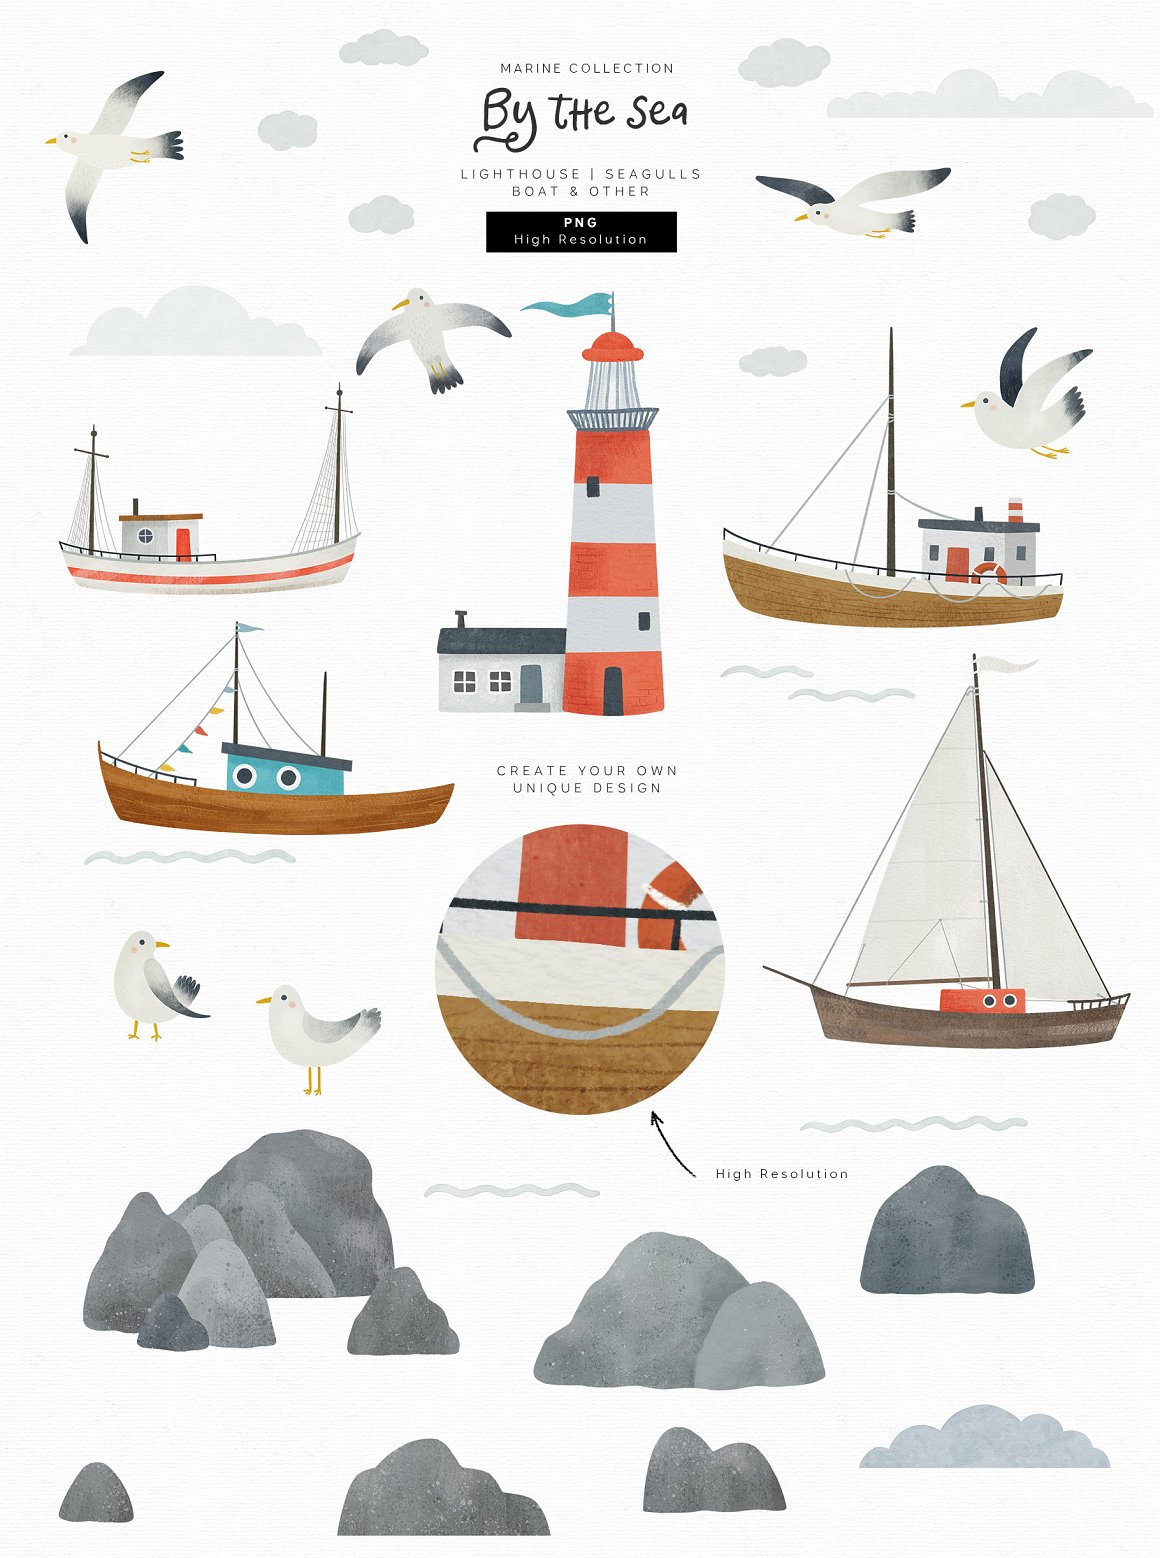 Ships with stones and a lighthouse.